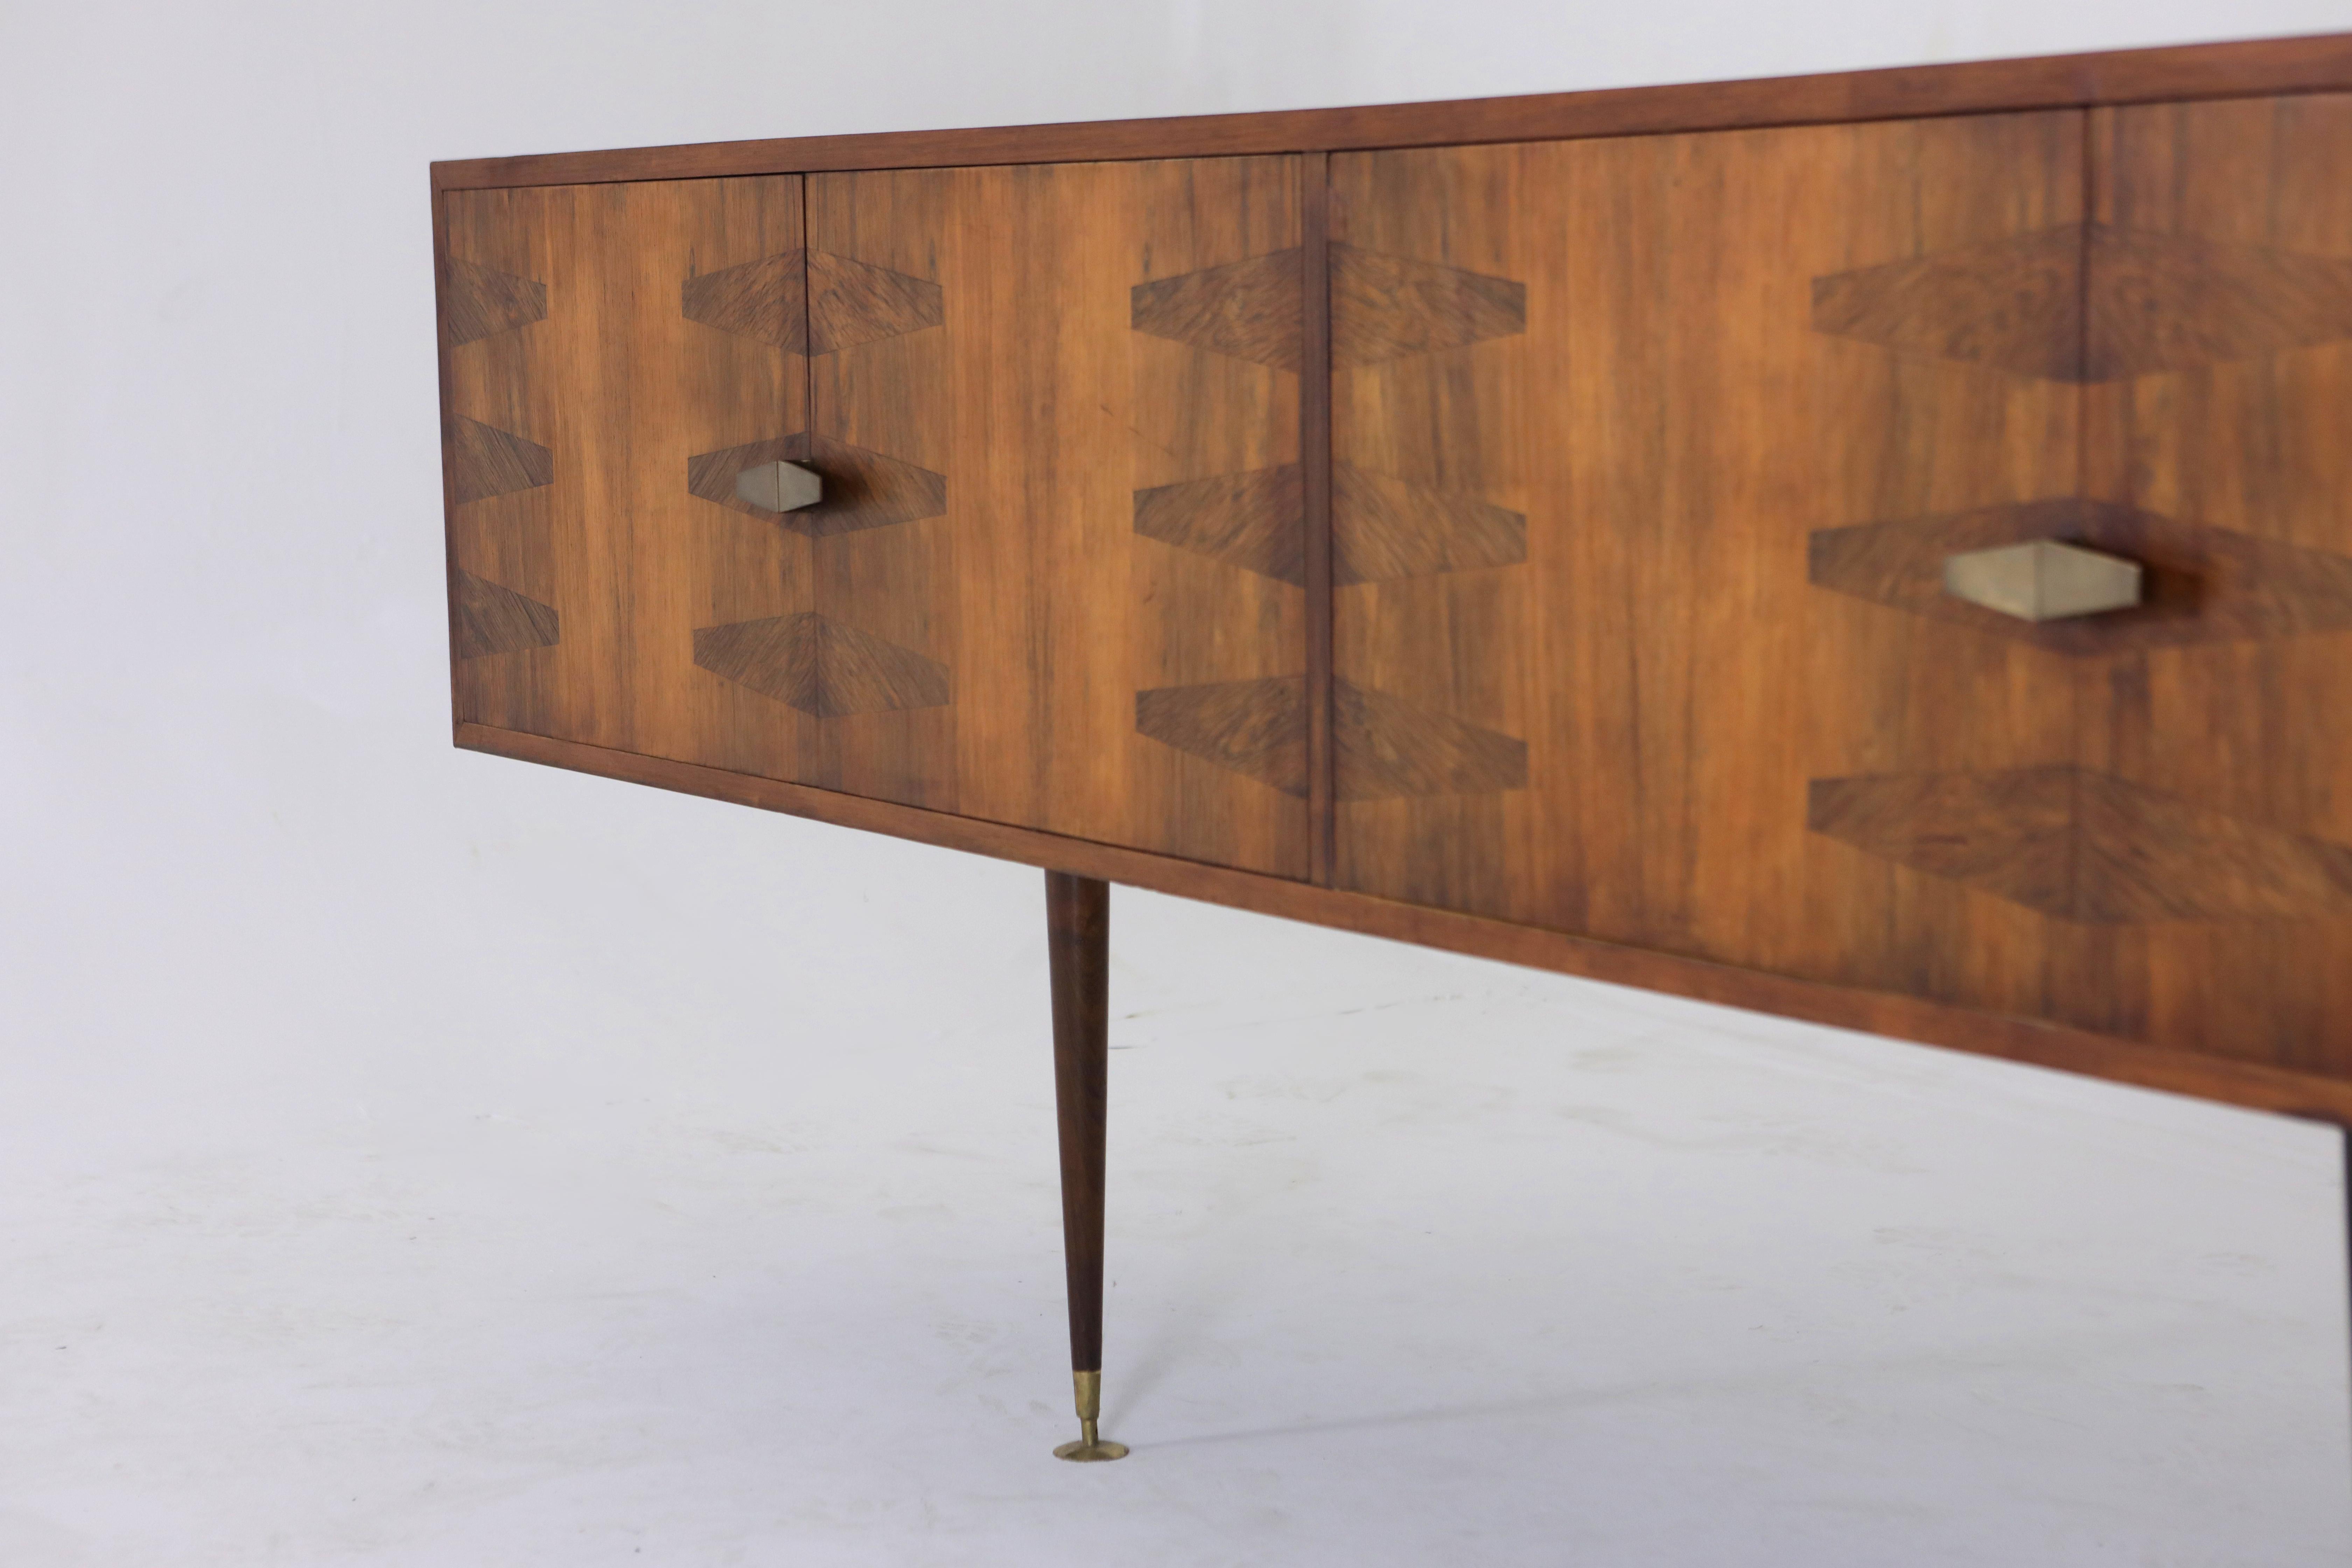 Very rare Mid-Century Modern wall-mounted buffet by Brazilian Designer Giuseppe Scapinelli, Brazil, 1950s

This piece was designed by the acclaimed Italian-born designer Giuseppe Scapinelli. Structured in solid wood, this piece features two